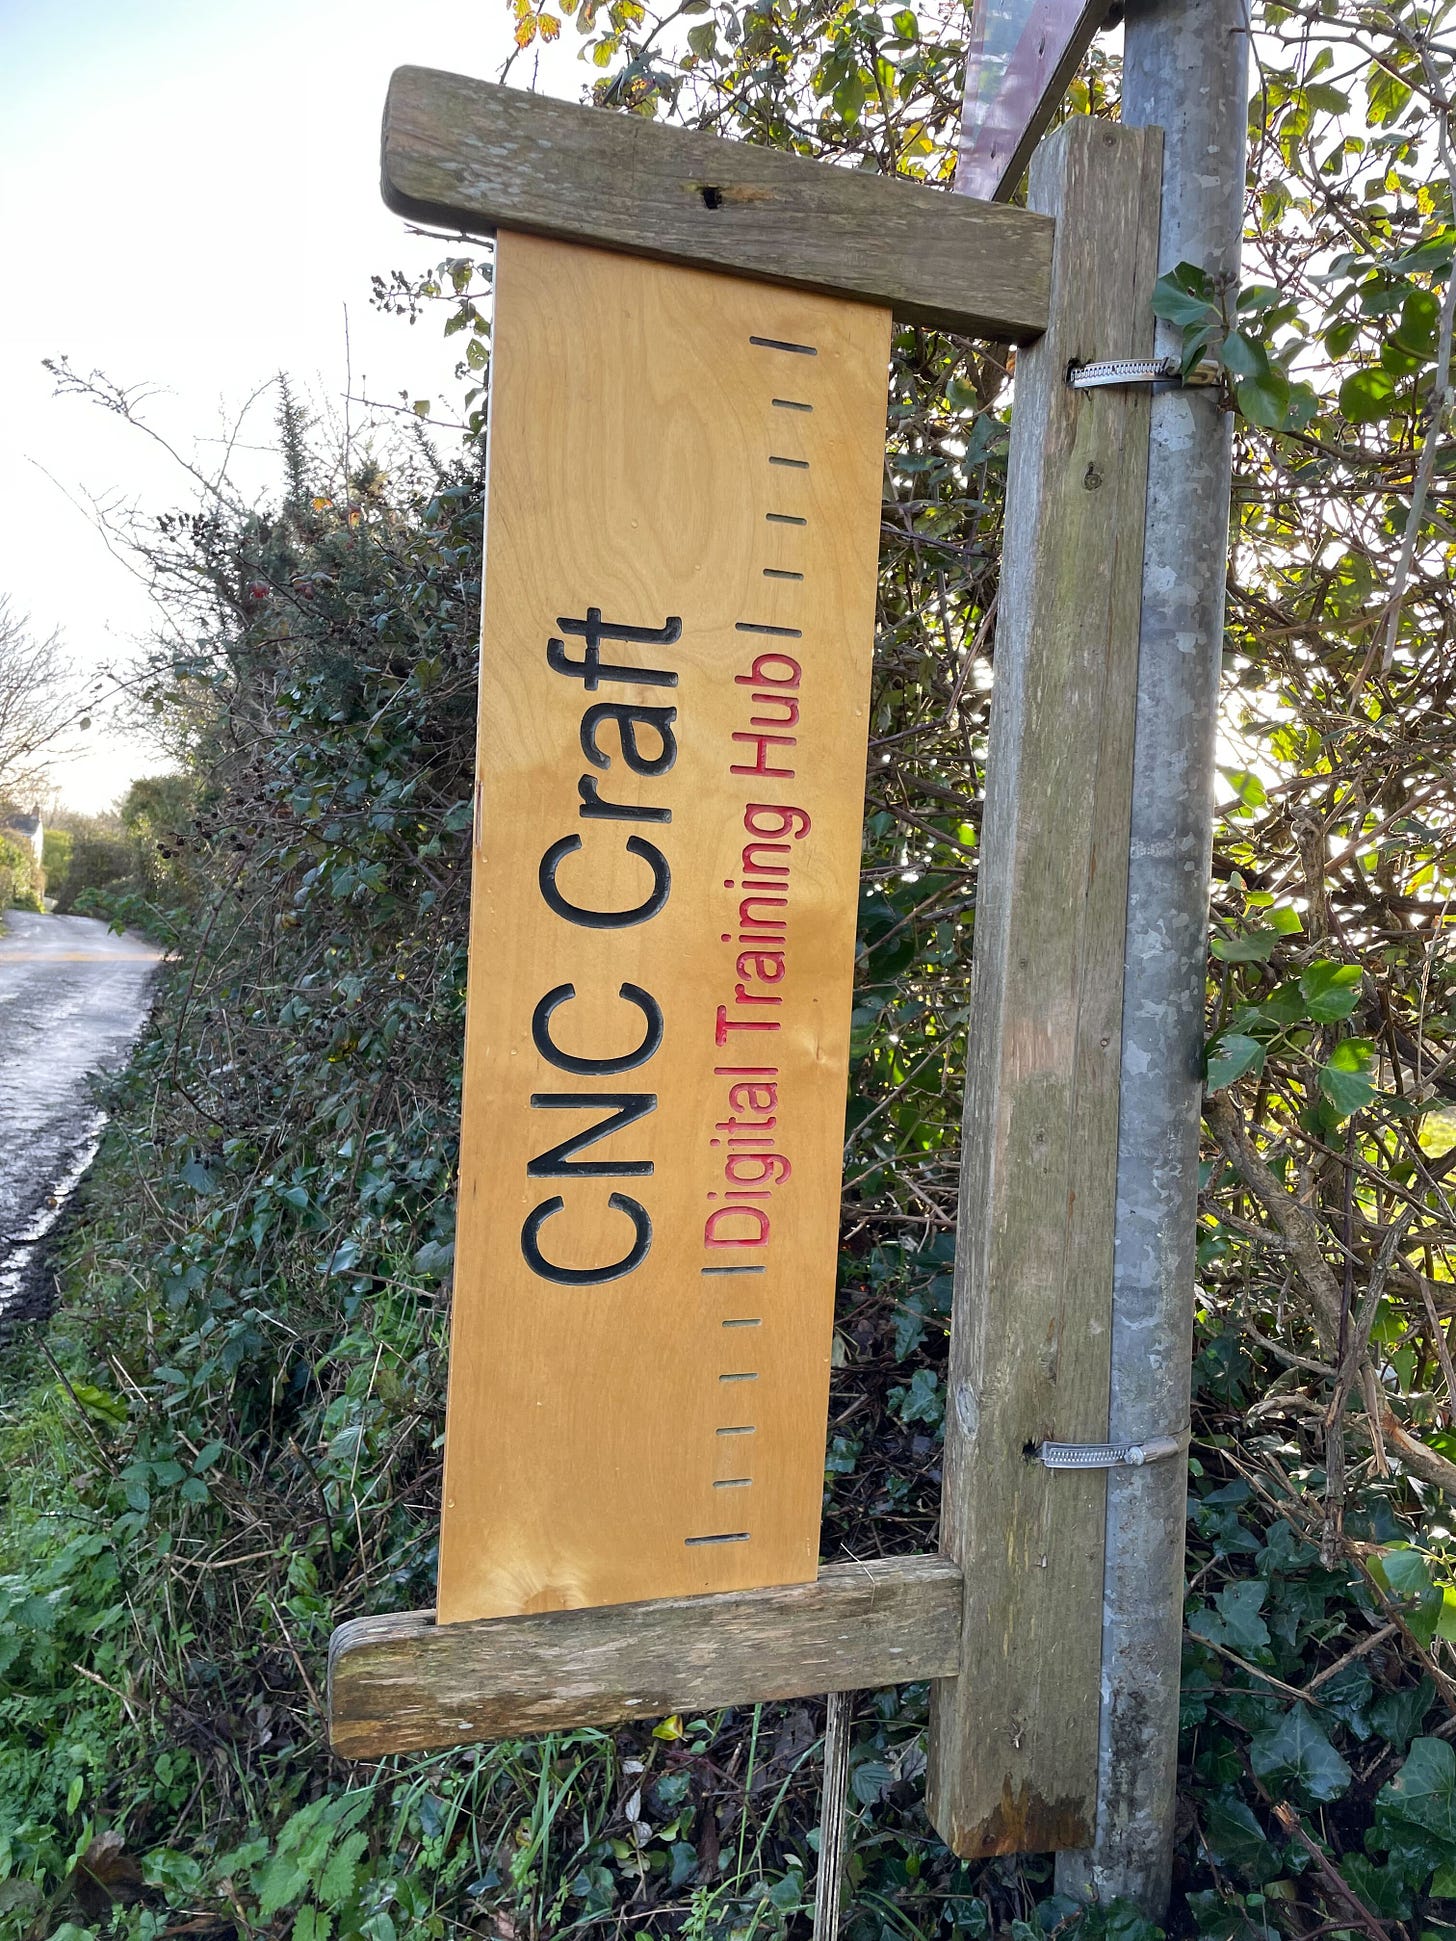 A sign hangs on the side of the road that reads CNC Craft Digital Training Hub